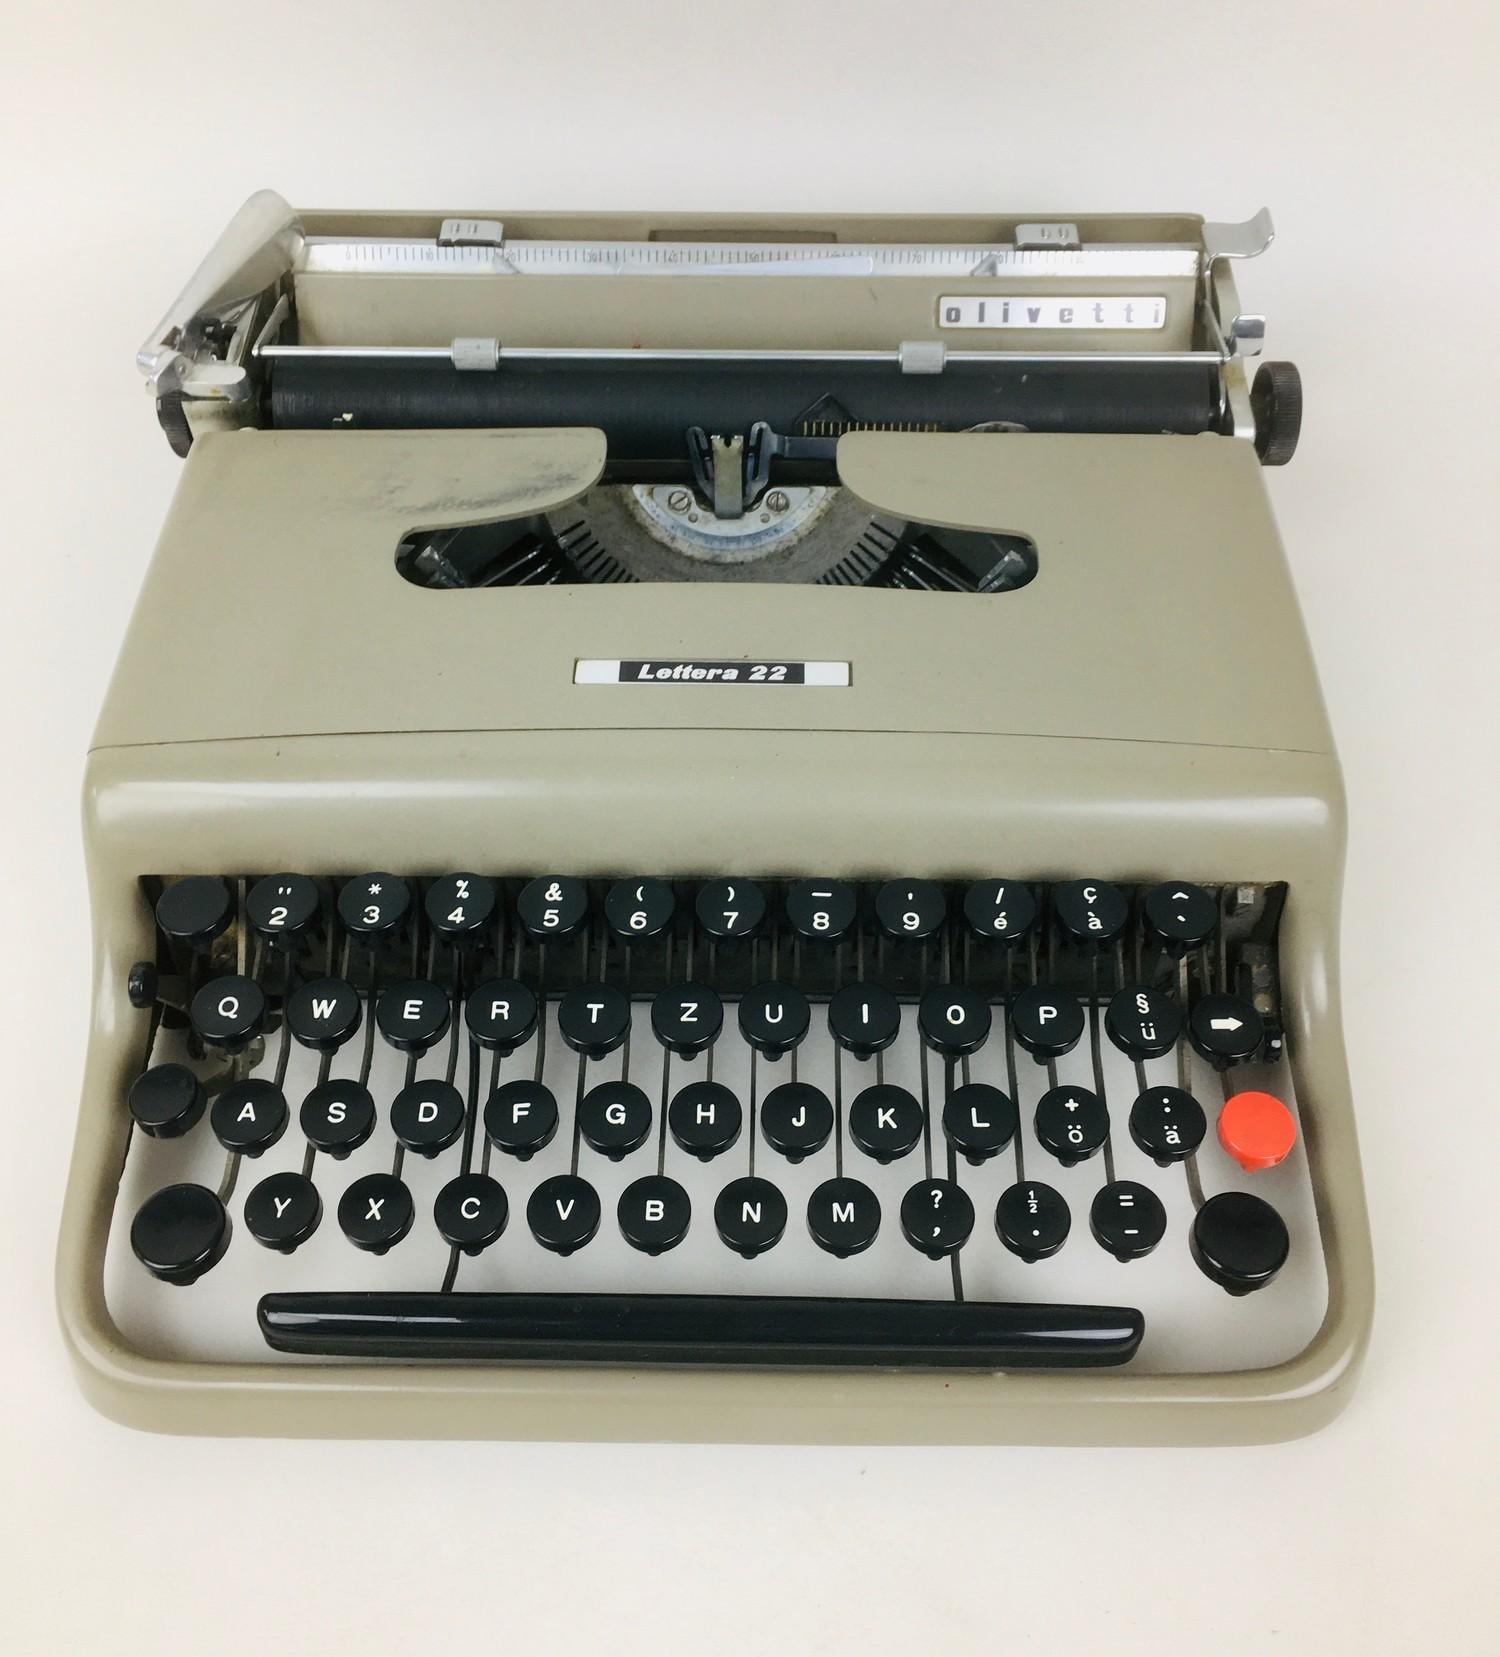 A vintage Olivetti Letter 22 typewriter, grey painted finish, with loose brown fabric cover, 30 by